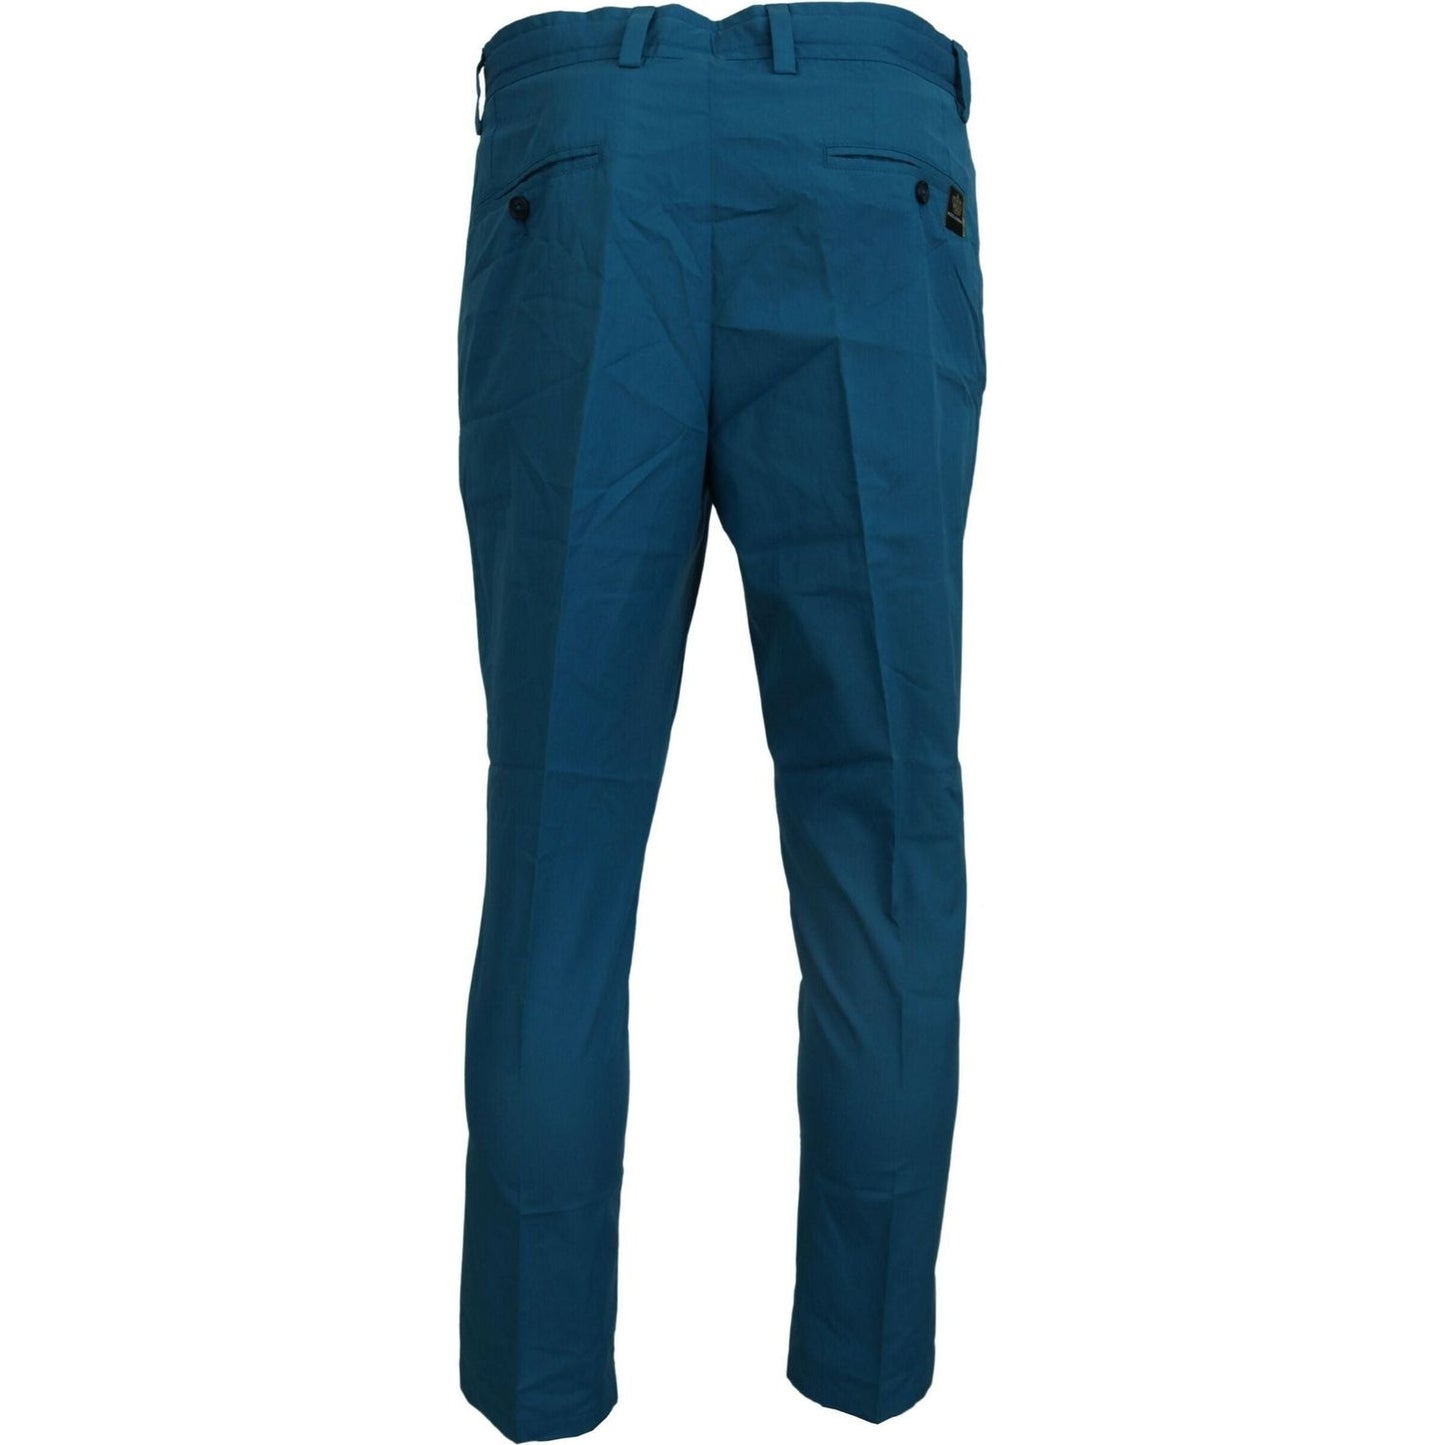 Dolce & Gabbana Casual Blue Chinos Trousers Pants blue-cotton-chinos-trousers-pants